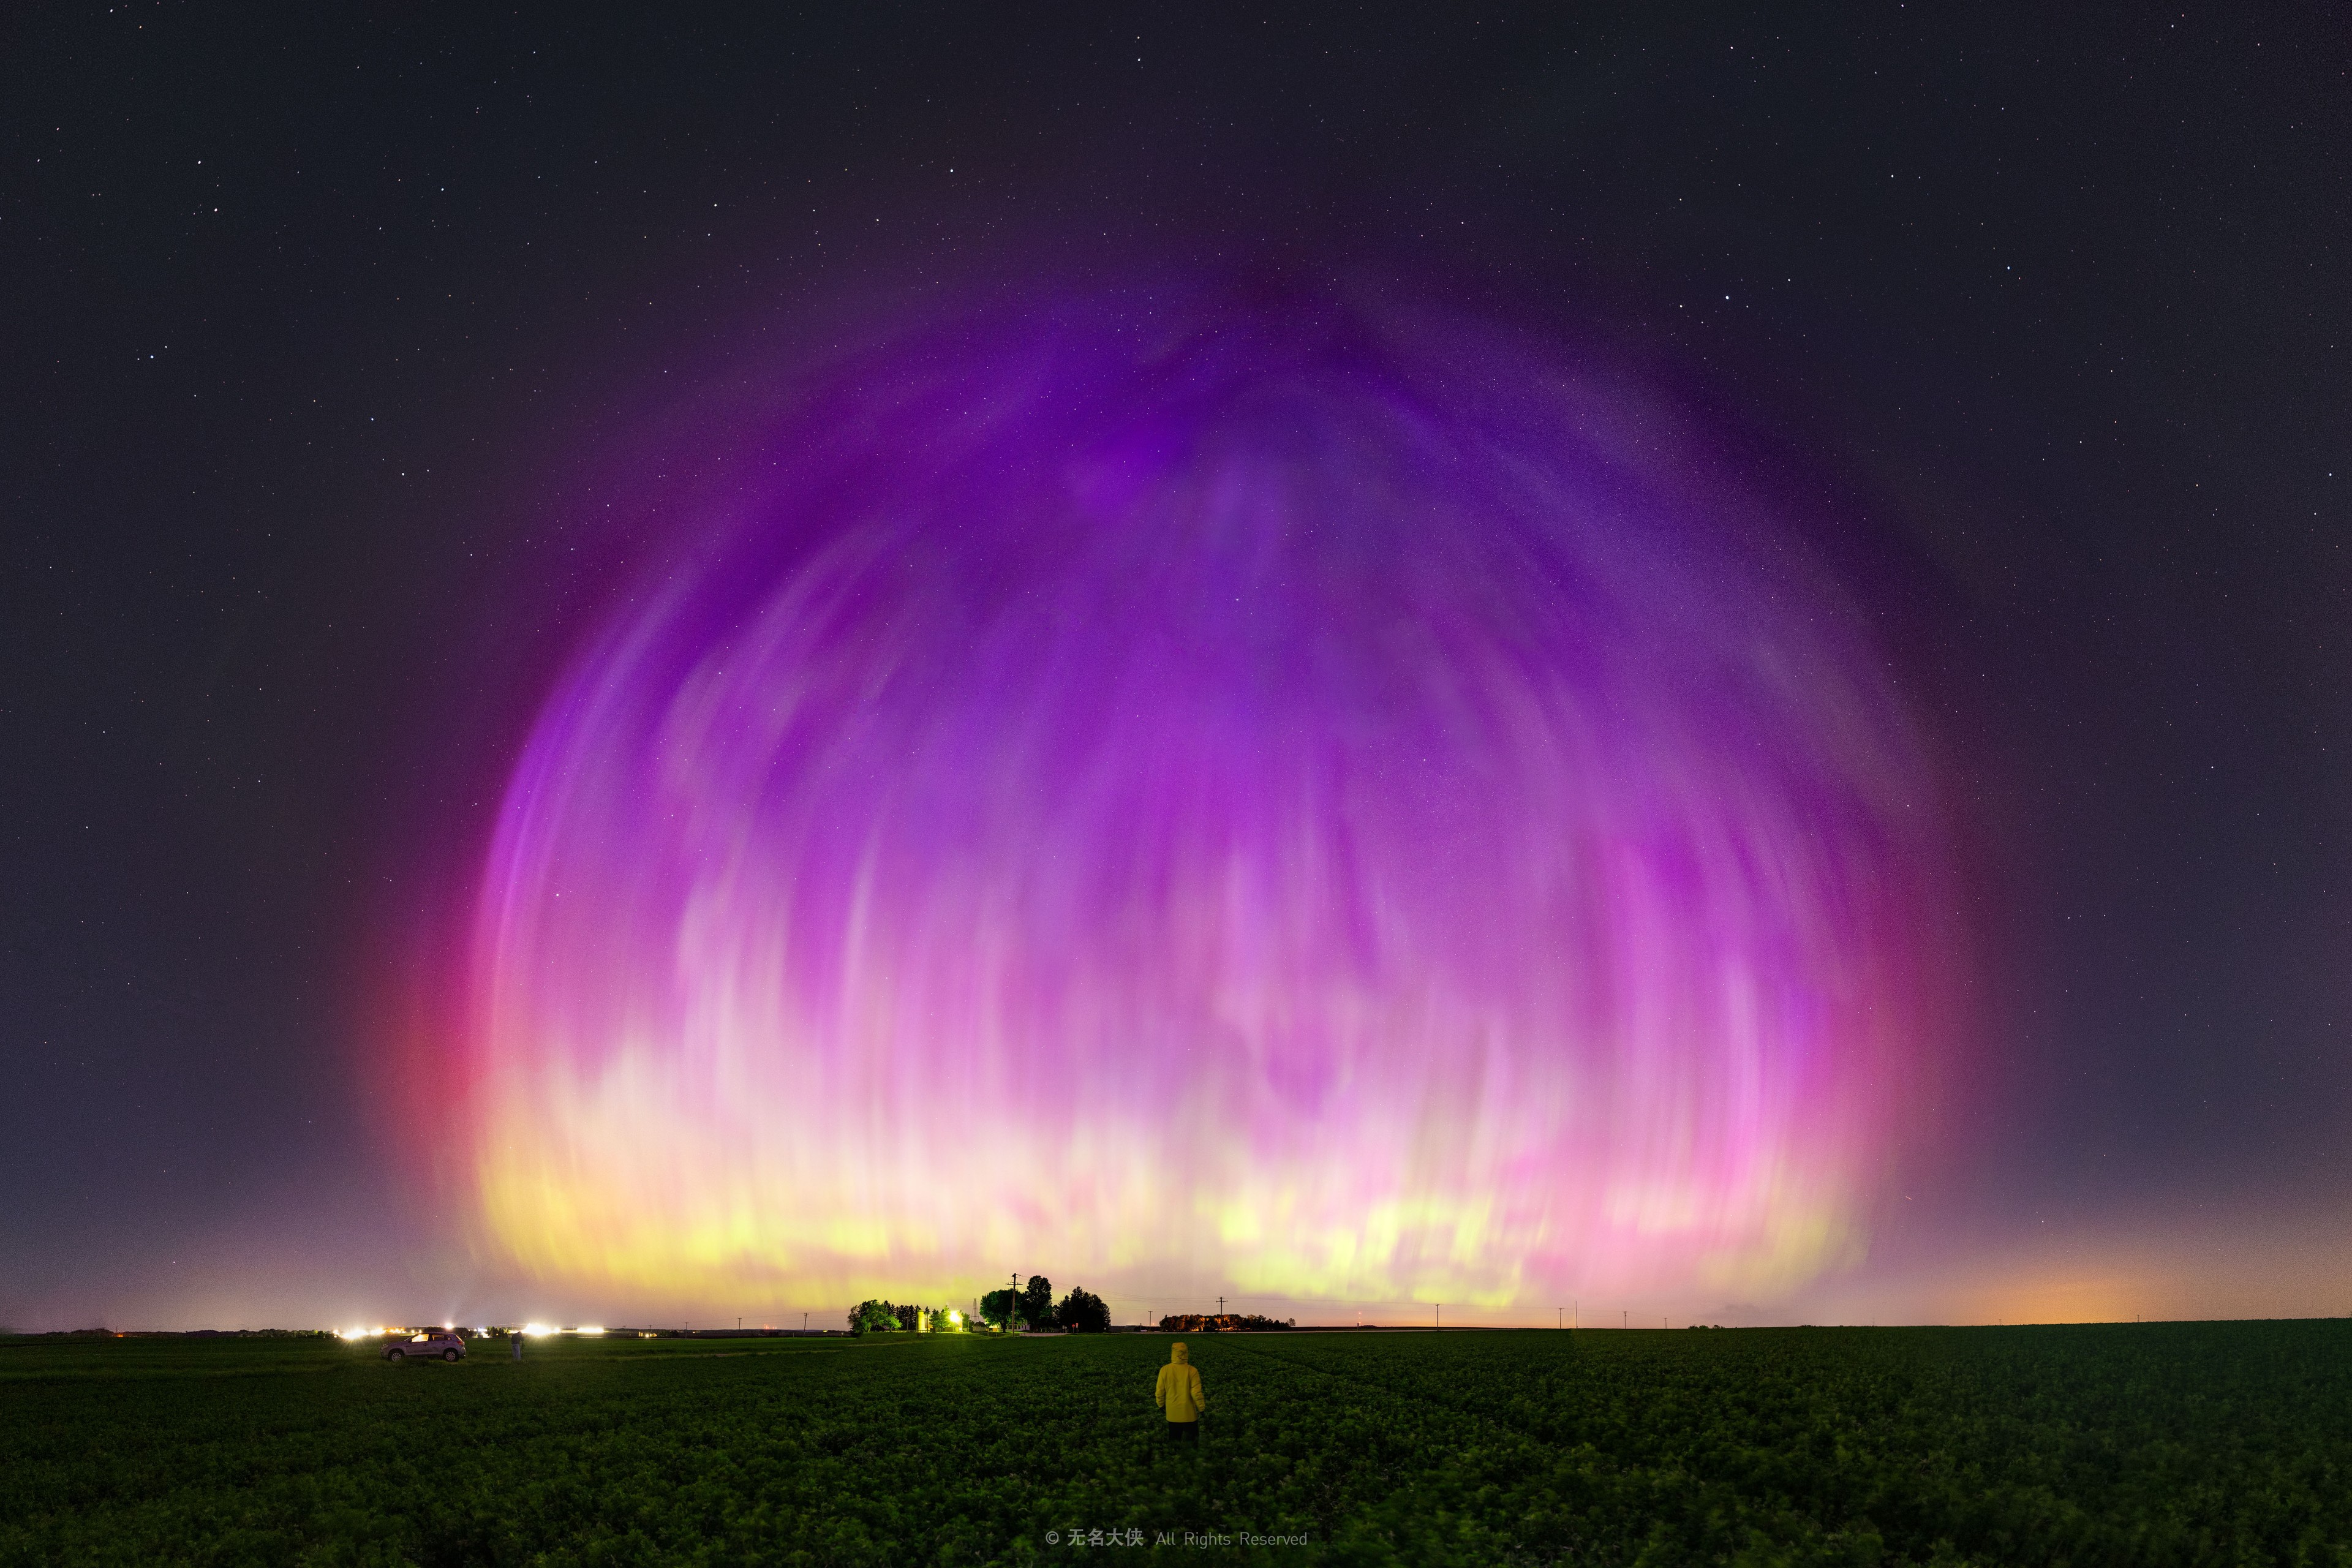 It seemed like night, but part of the sky glowed purple.  It was the now famous night of May 10, 2024, when people over much of the world reported beautiful aurora-filled skies. The featured image was captured this night during early morning hours from Arlington, Wisconsin, USA. The panorama is a composite of several 6-second exposures covering two thirds of the visible sky, with north in the center, and processed to heighten the colors and remove electrical wires. The photographer (in the foreground) reported that the aurora appeared to flow from a point overhead but illuminated the sky only toward the north. The aurora's energetic particles originated from CMEs ejected from our Sun over sunspot AR 3664 a few days before. This large active region rotated to the far side of the Sun last week, but may well survive to rotate back toward the Earth next week.